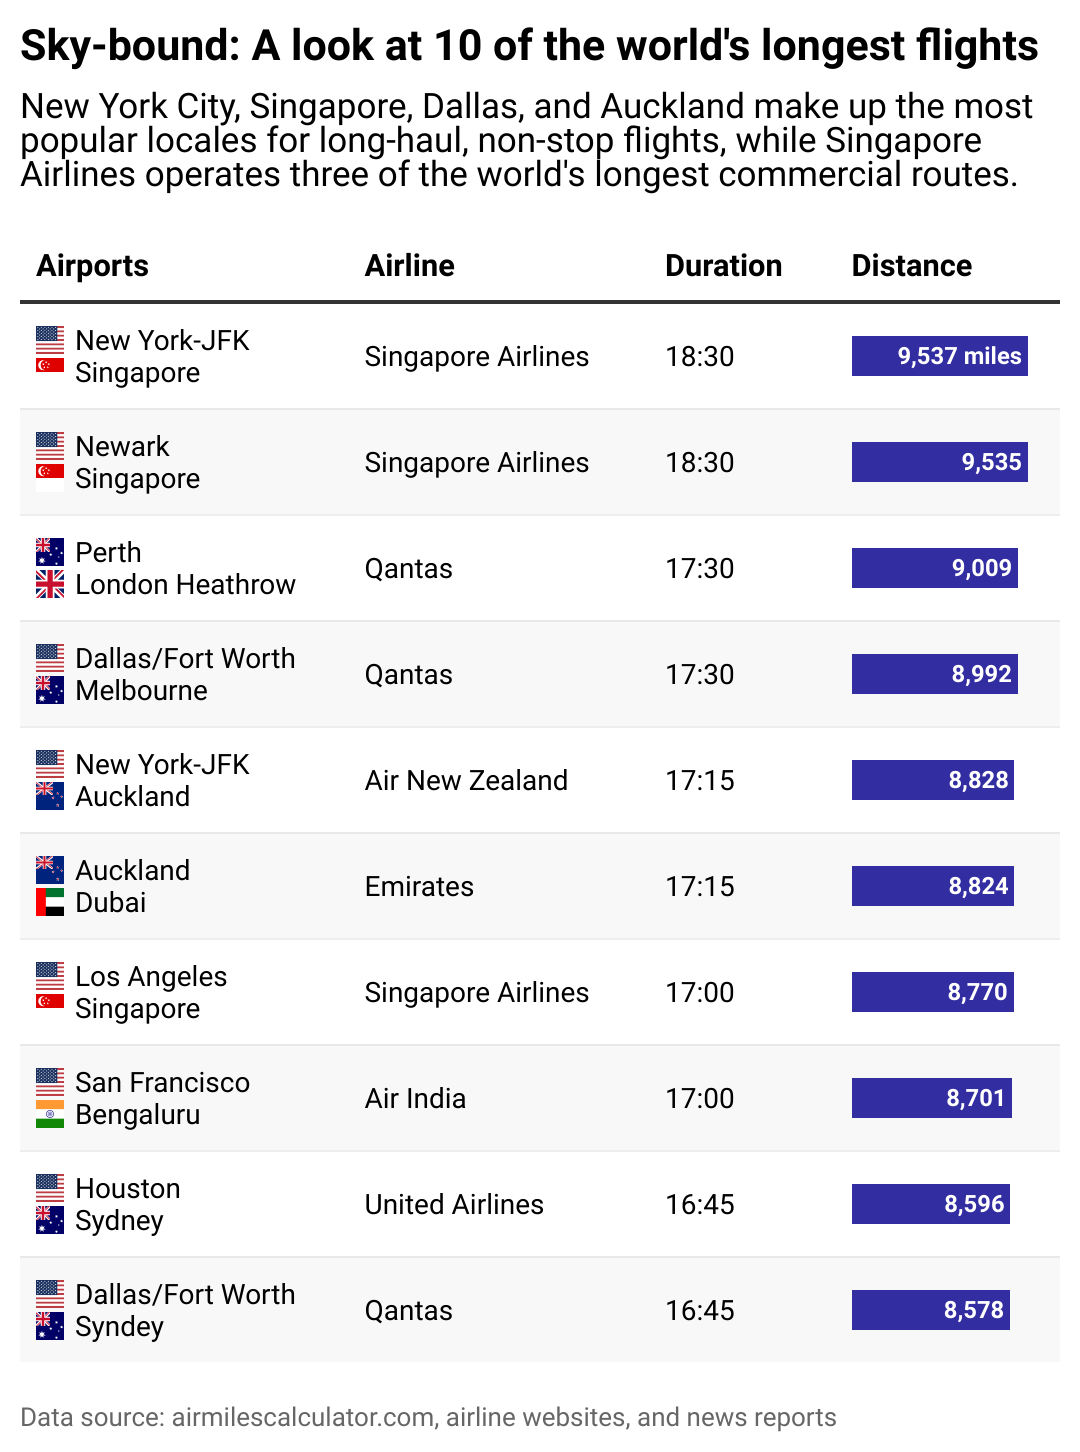 Table of 10 of the world's longest commercial flights with nonstop service.